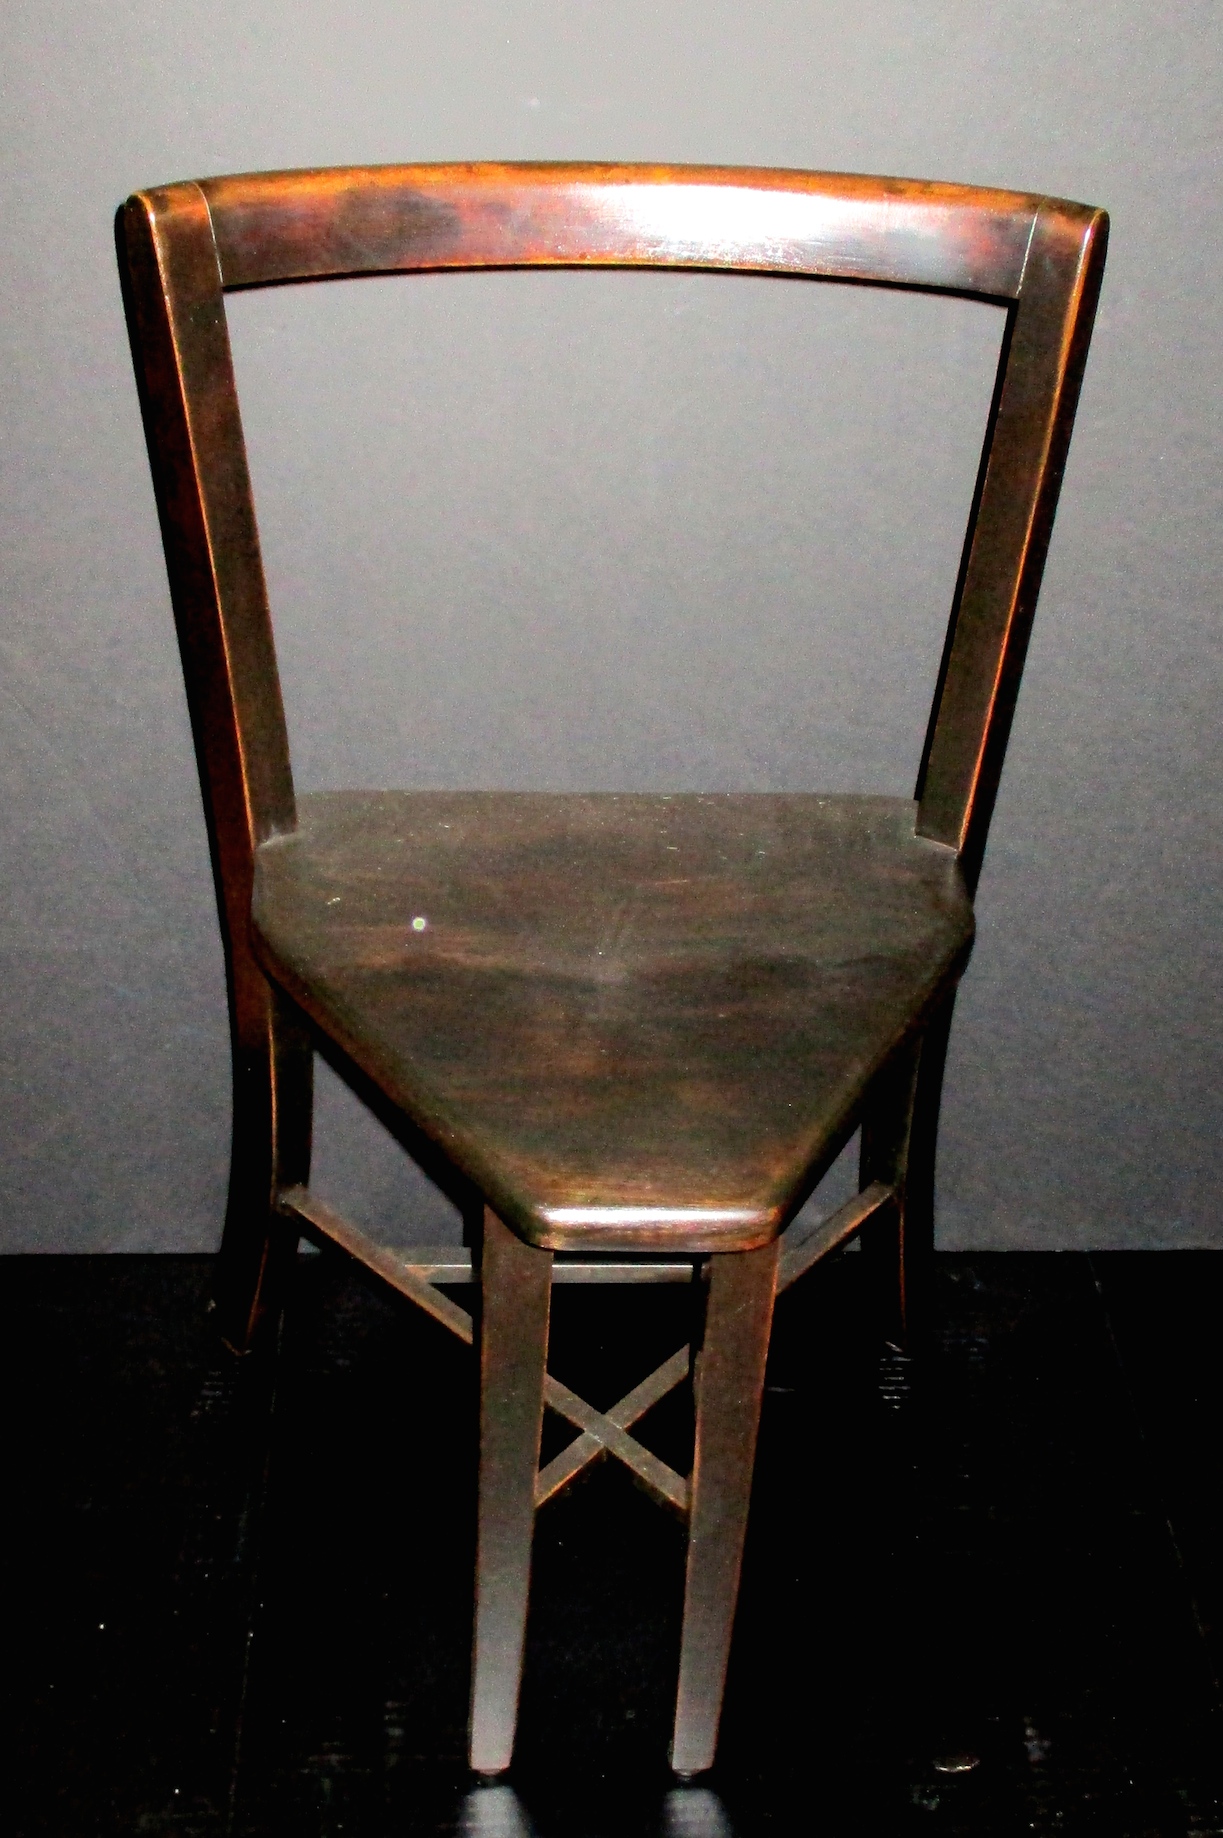 One of 4 Chairs from a Set of SEATMORE Ice Cream Parlor Chairs & Table from Frank Rieder & Sons